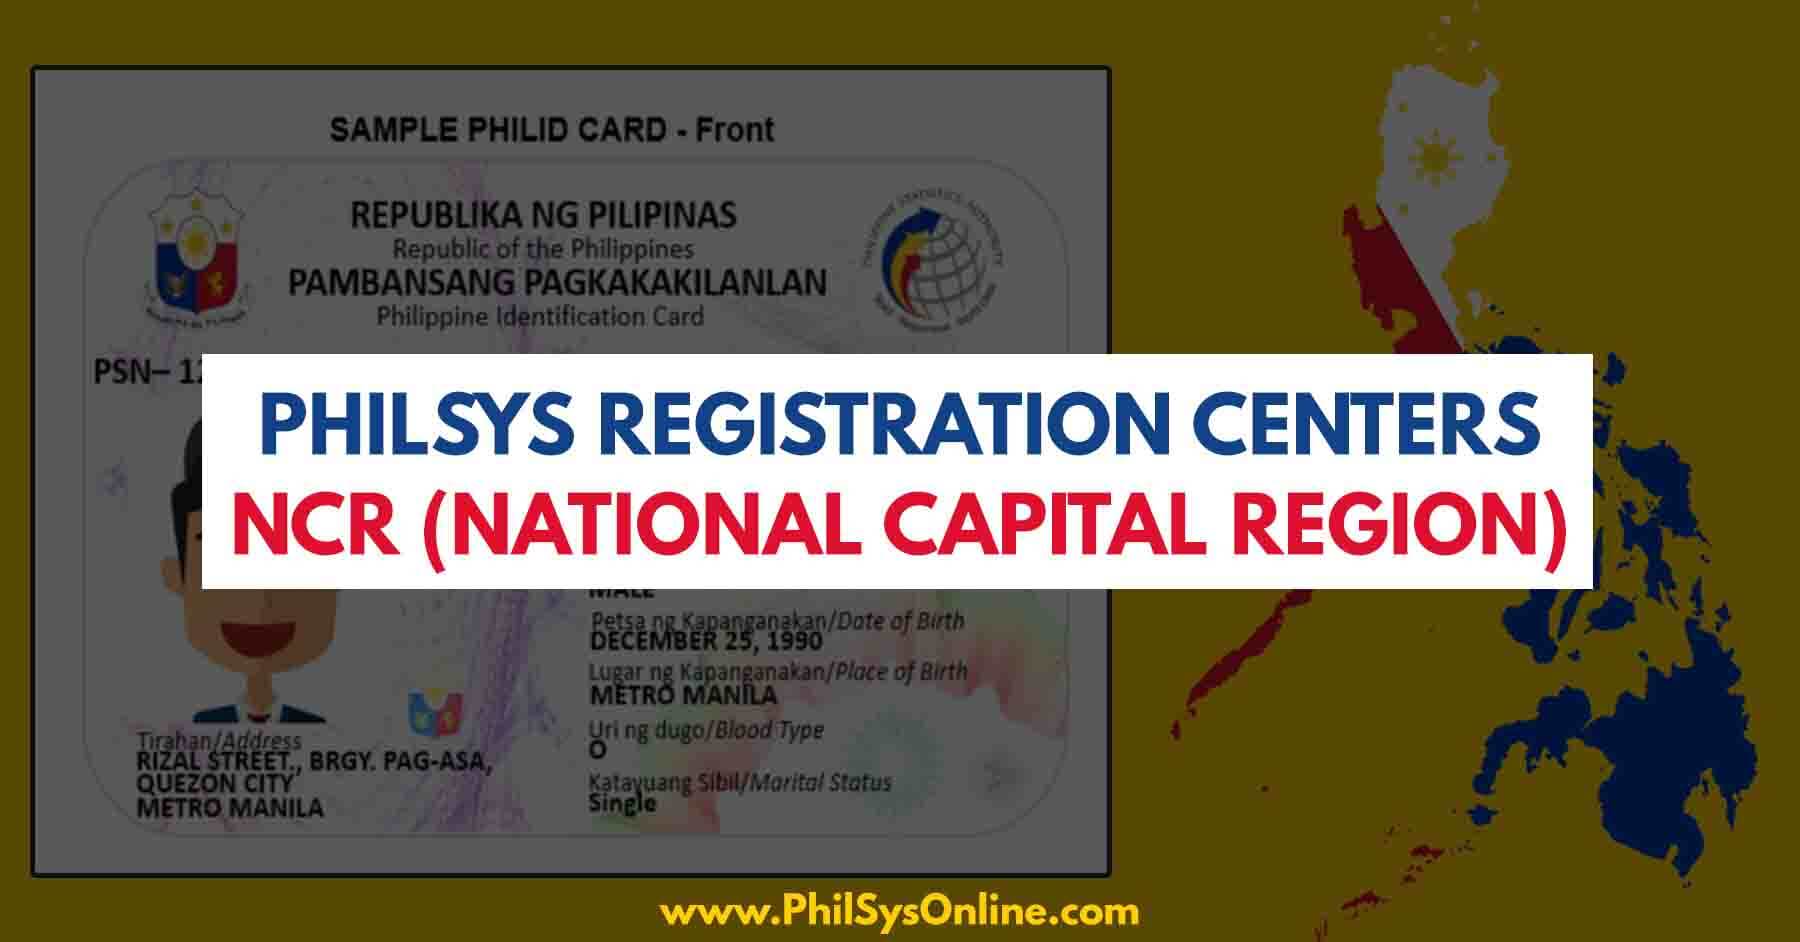 philsys registration center office in NCR National Capital Region